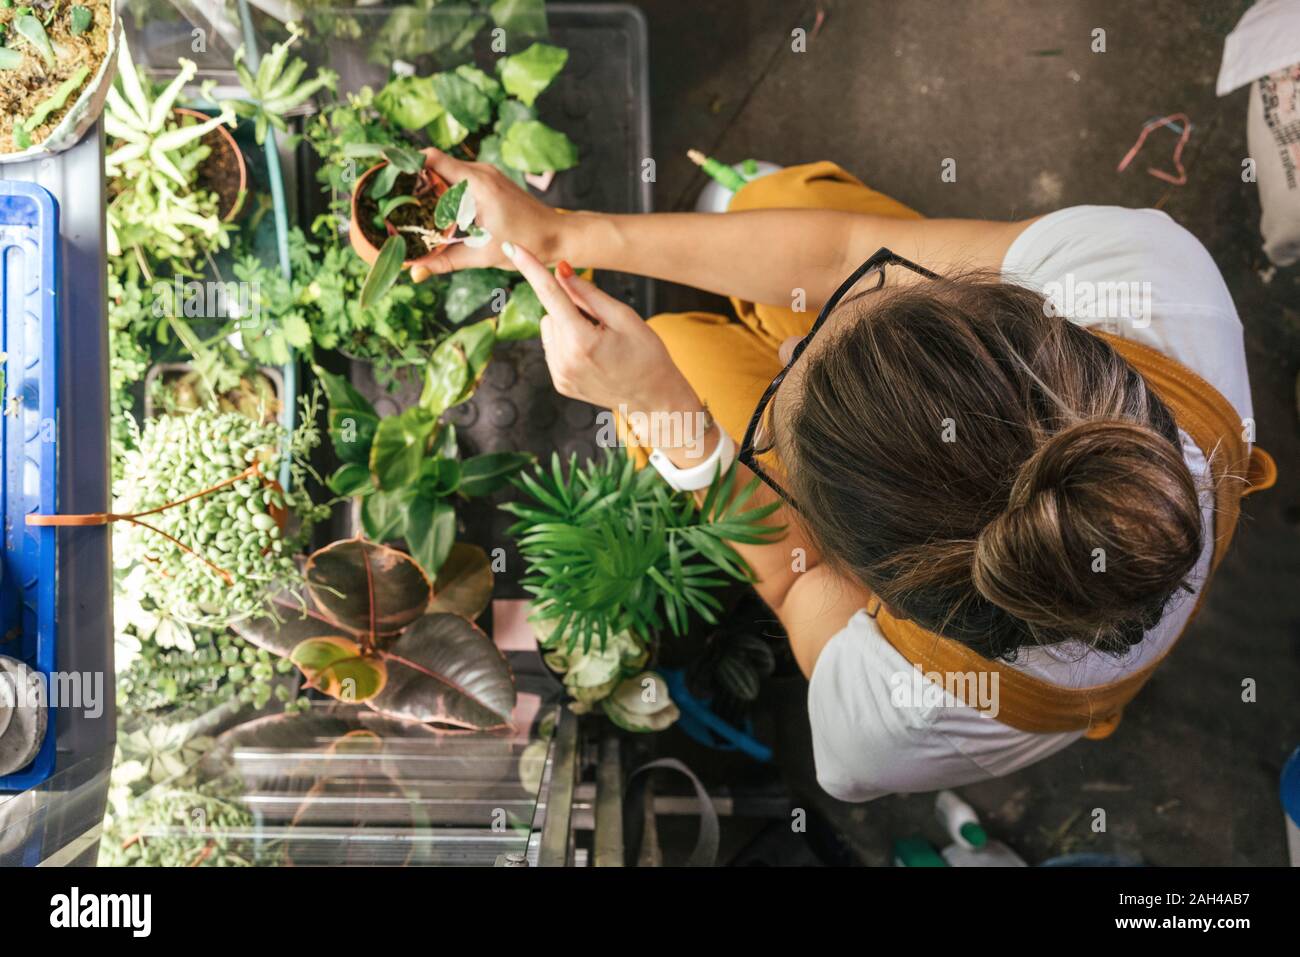 Top view of young woman caring for plants in a gardening shop Stock Photo